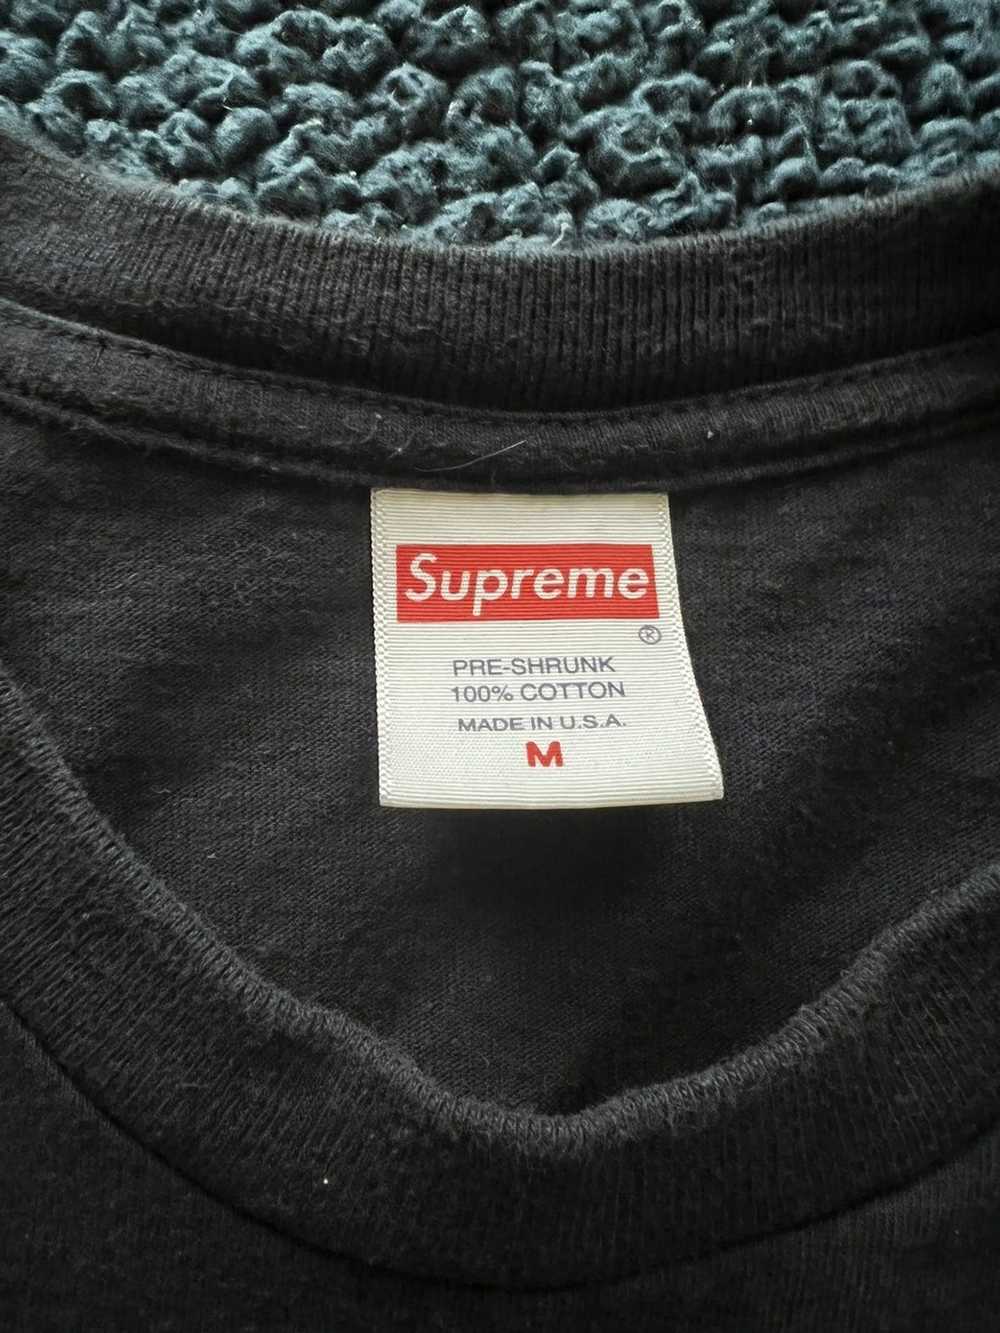 Supreme Barely Used Supreme Scratch T navy size M… - image 2